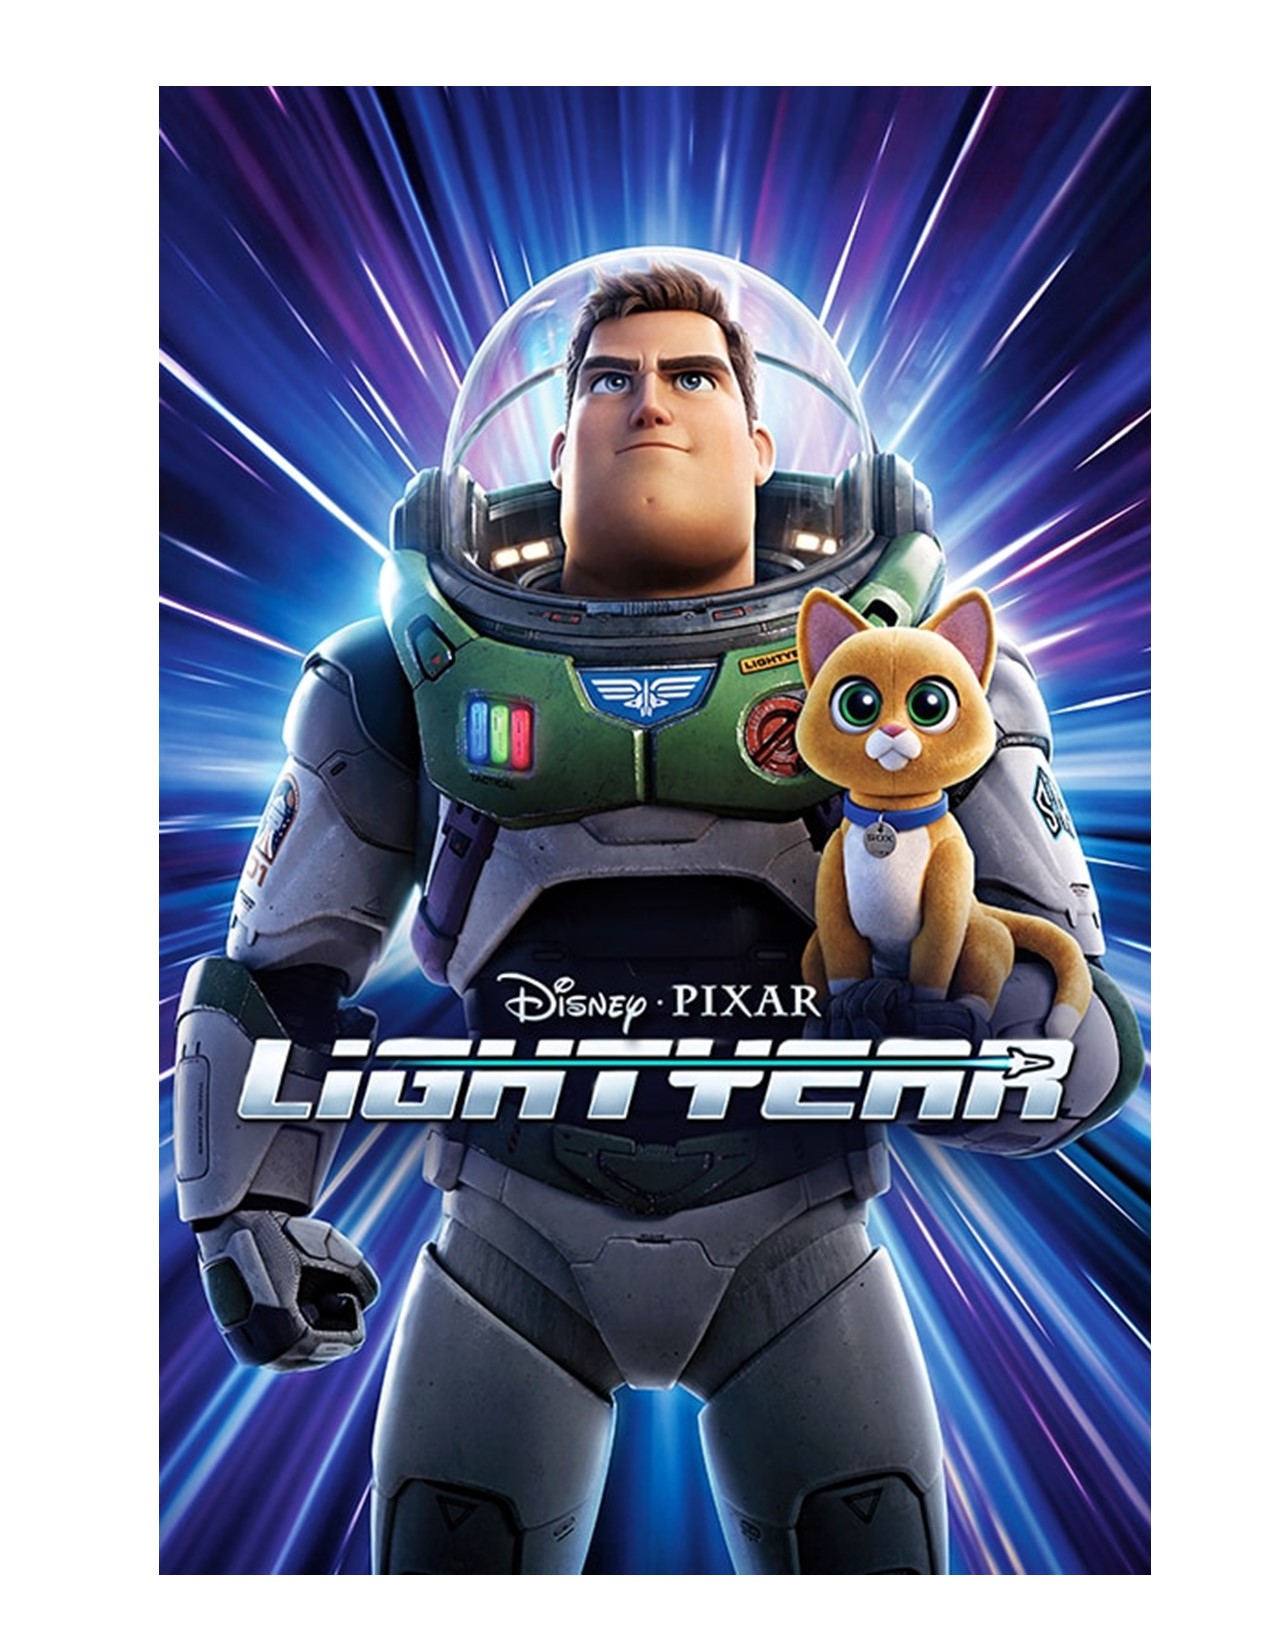 Buzz Lightyear holding a cat surrounded by lazar lights with "Lightyear" spelled out in front of him.